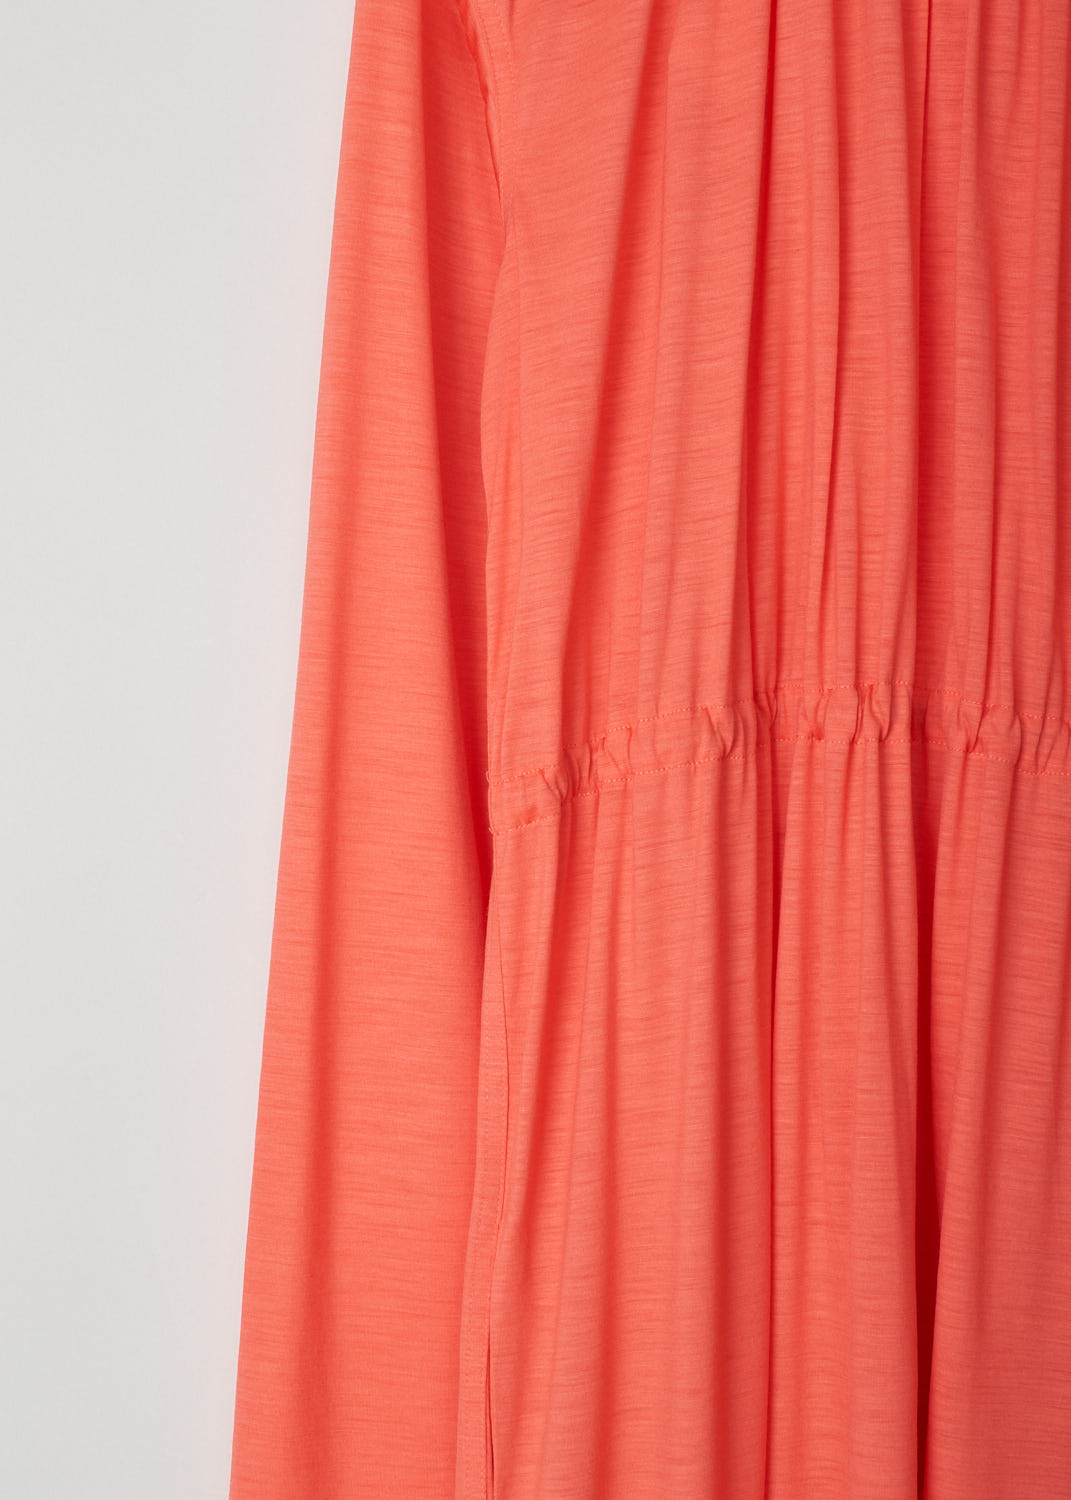 SOFIE Dâ€™HOORE, LONG SLEEVE CORAL DRESS, DARA_WOJE_CORAL, Pink, Orange, Detail, This coral colored maxi dress features a gathered elasticated neckline. The waist is also elasticated, cinching in the waist. Slant pockets can be found concealed in the seam.
